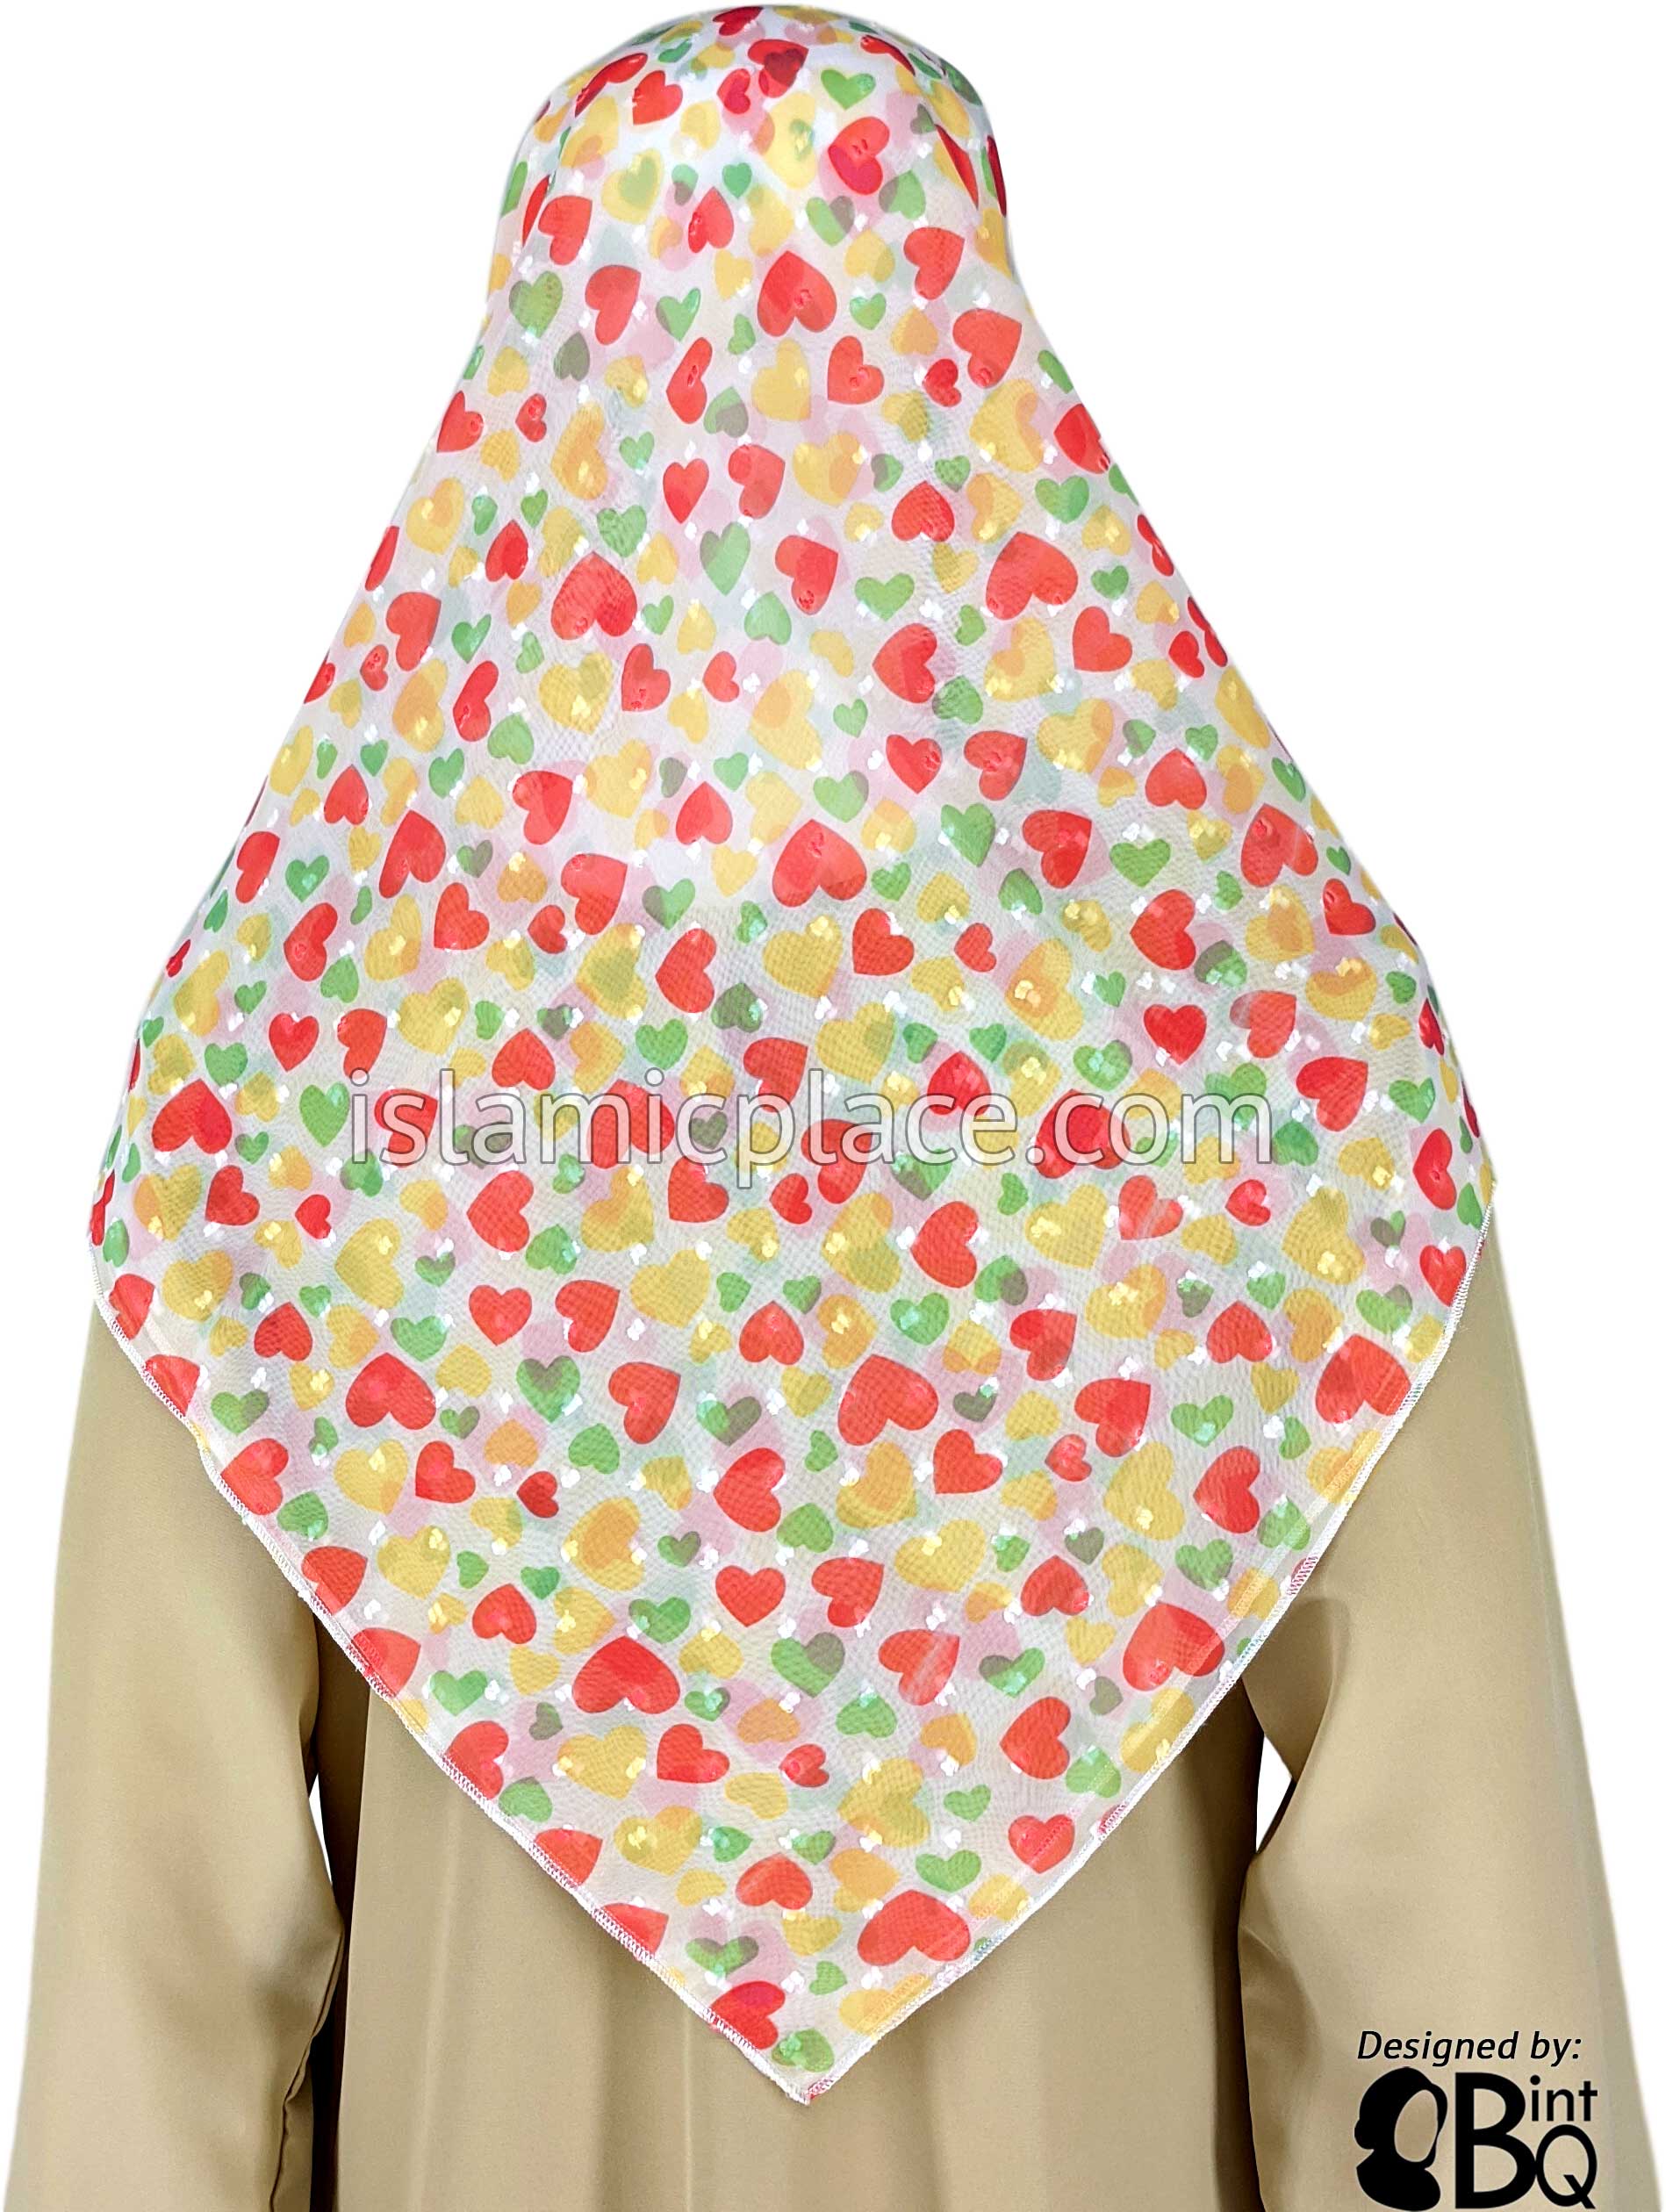 Coral, Green, And Yellow Hearts On White - 45" Square Printed Khimar